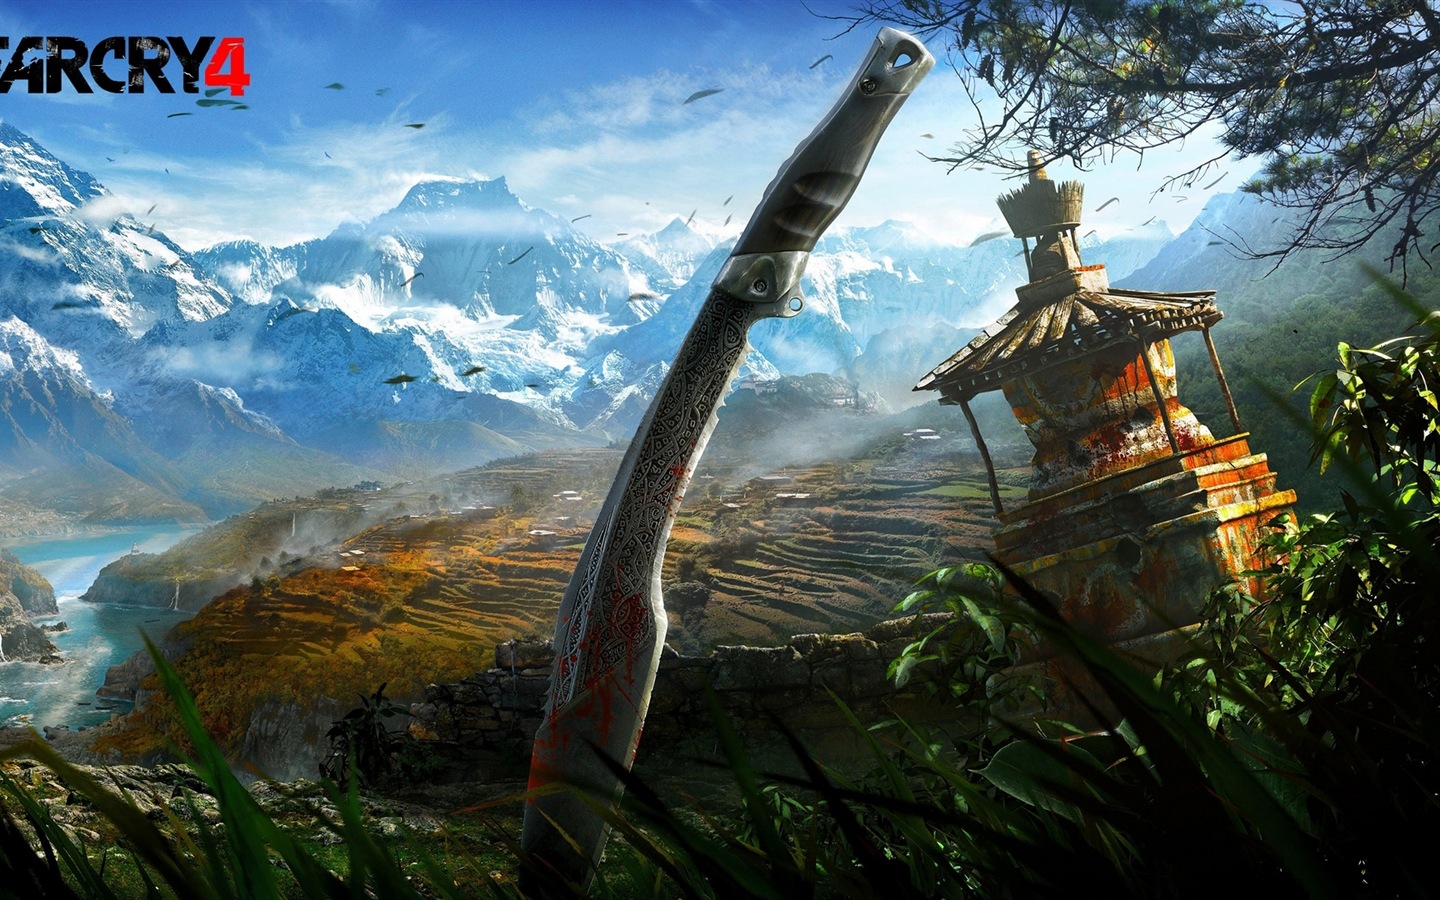 Far Cry 4 HD game wallpapers #1 - 1440x900